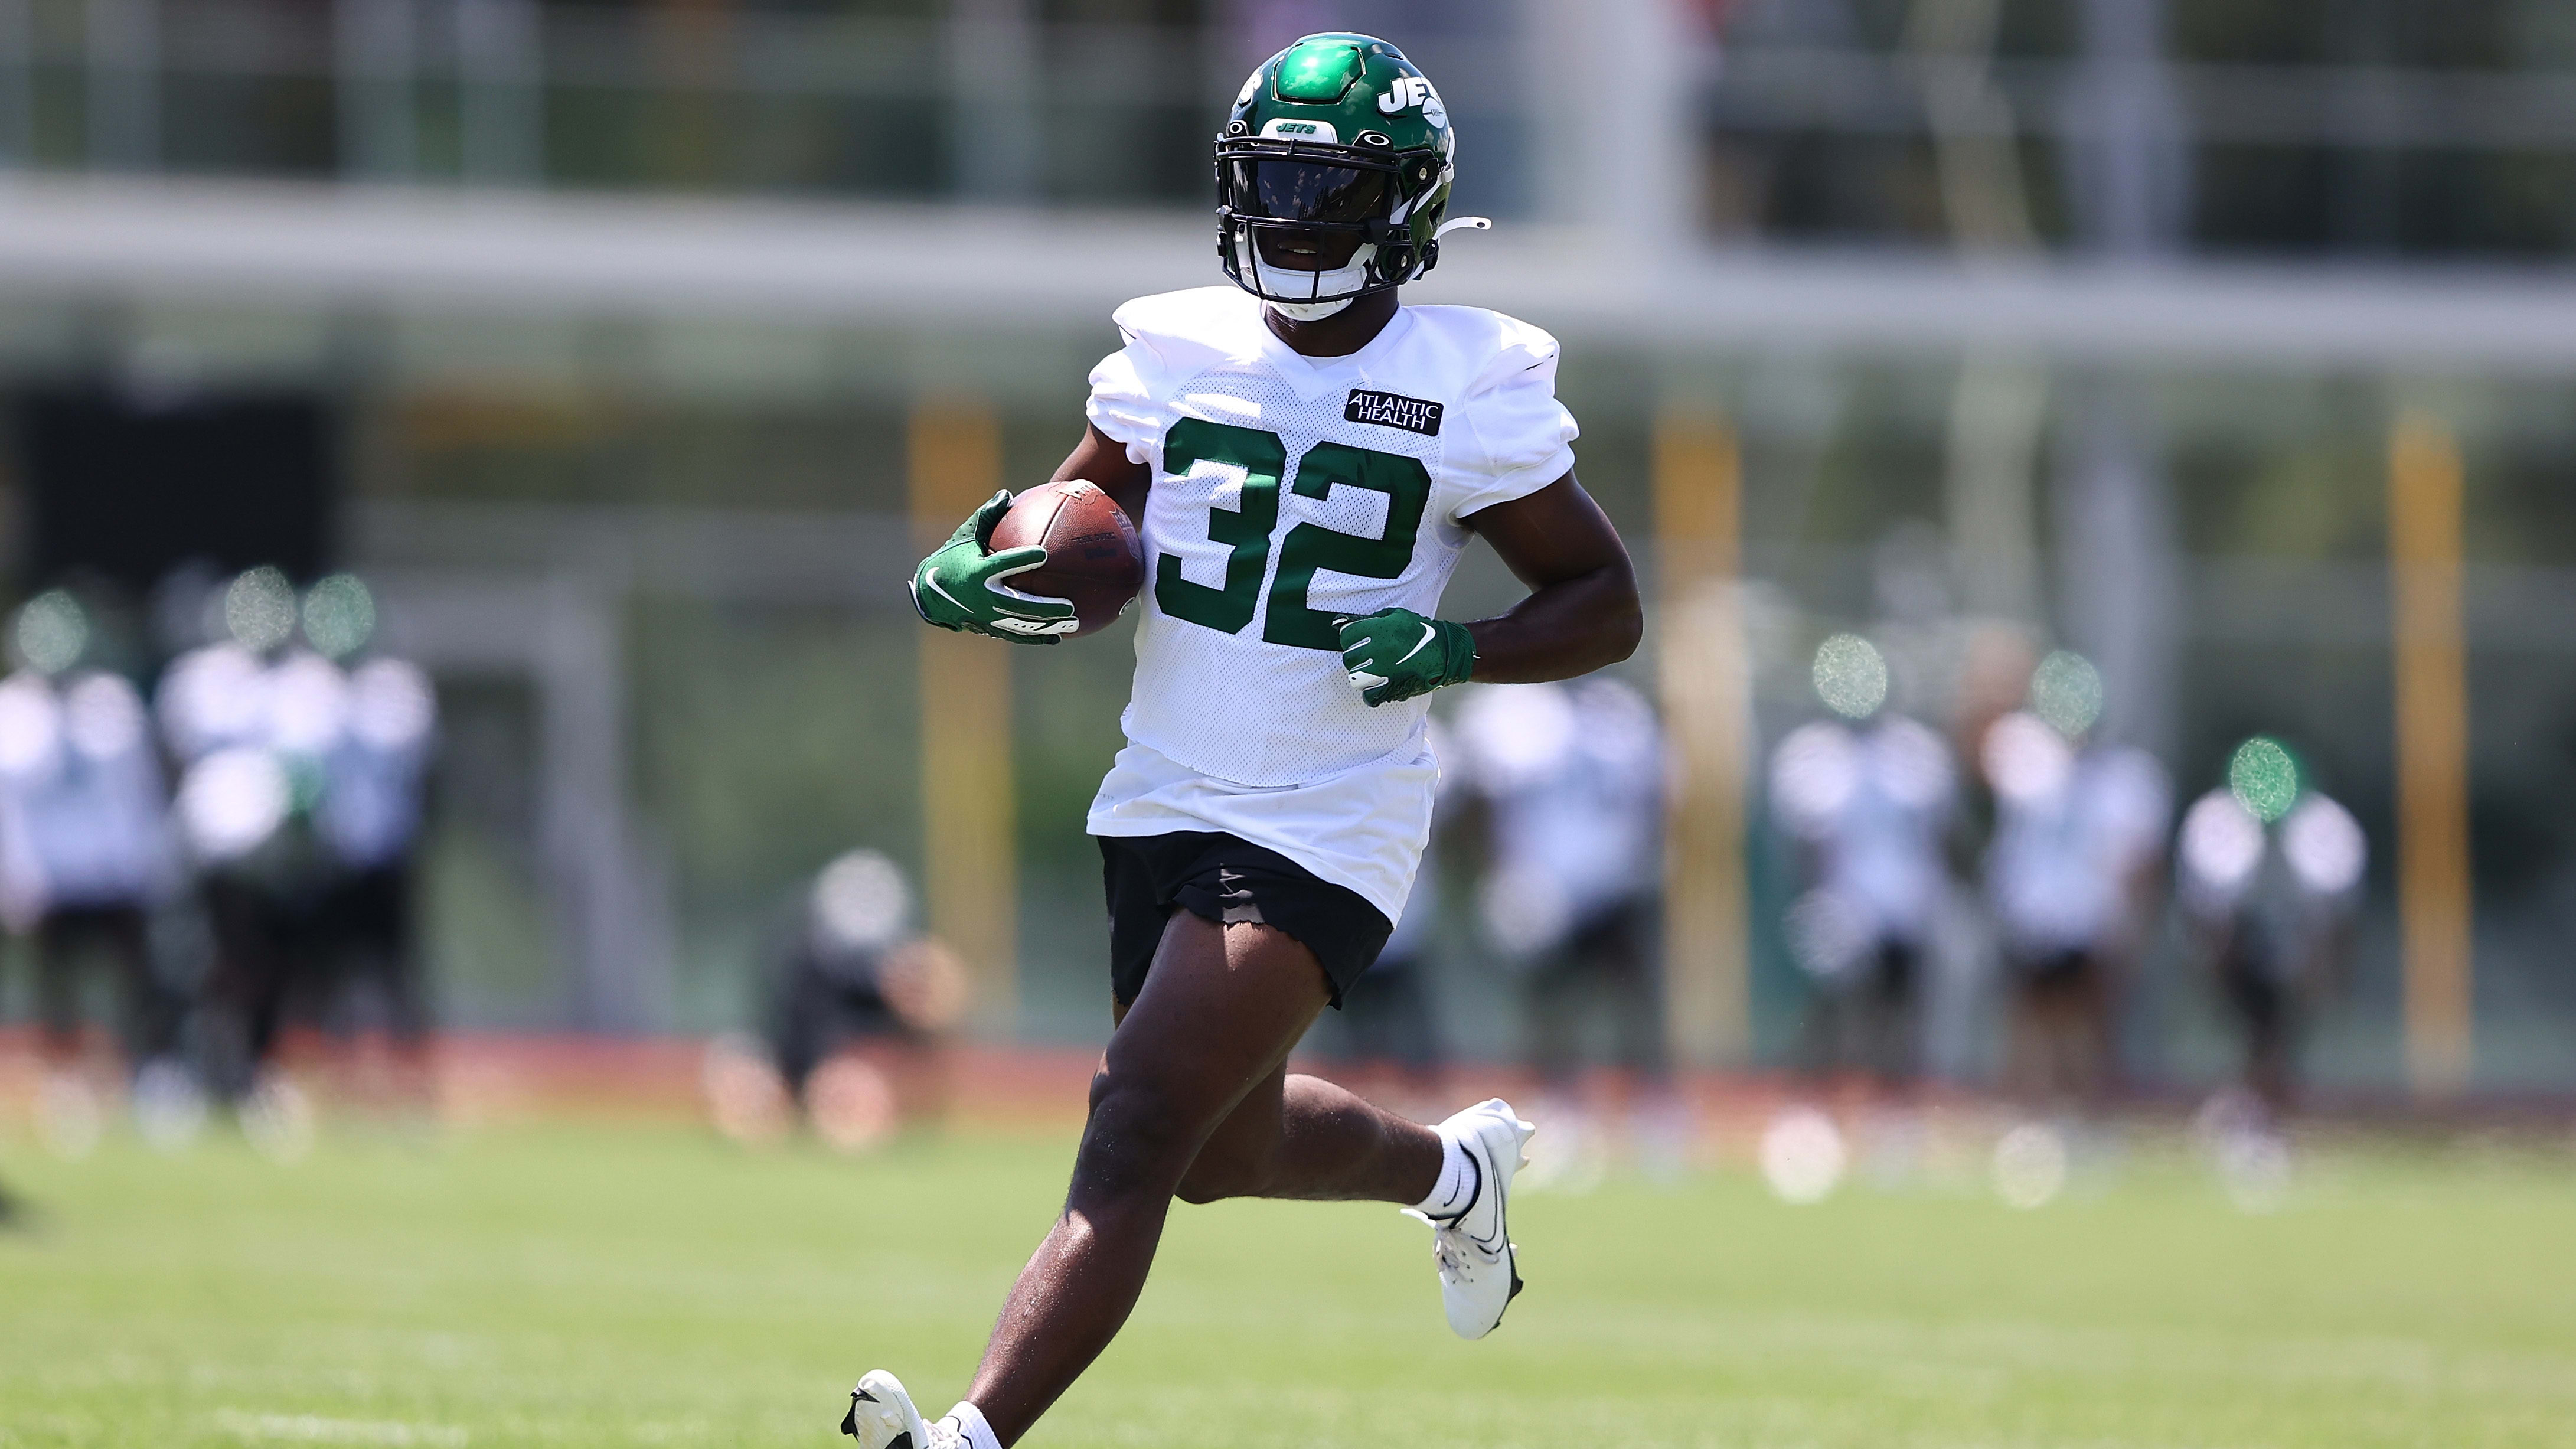 Michael Carter Fantasy Outlook Paints Him as a RB Sleeper Pick in 2021